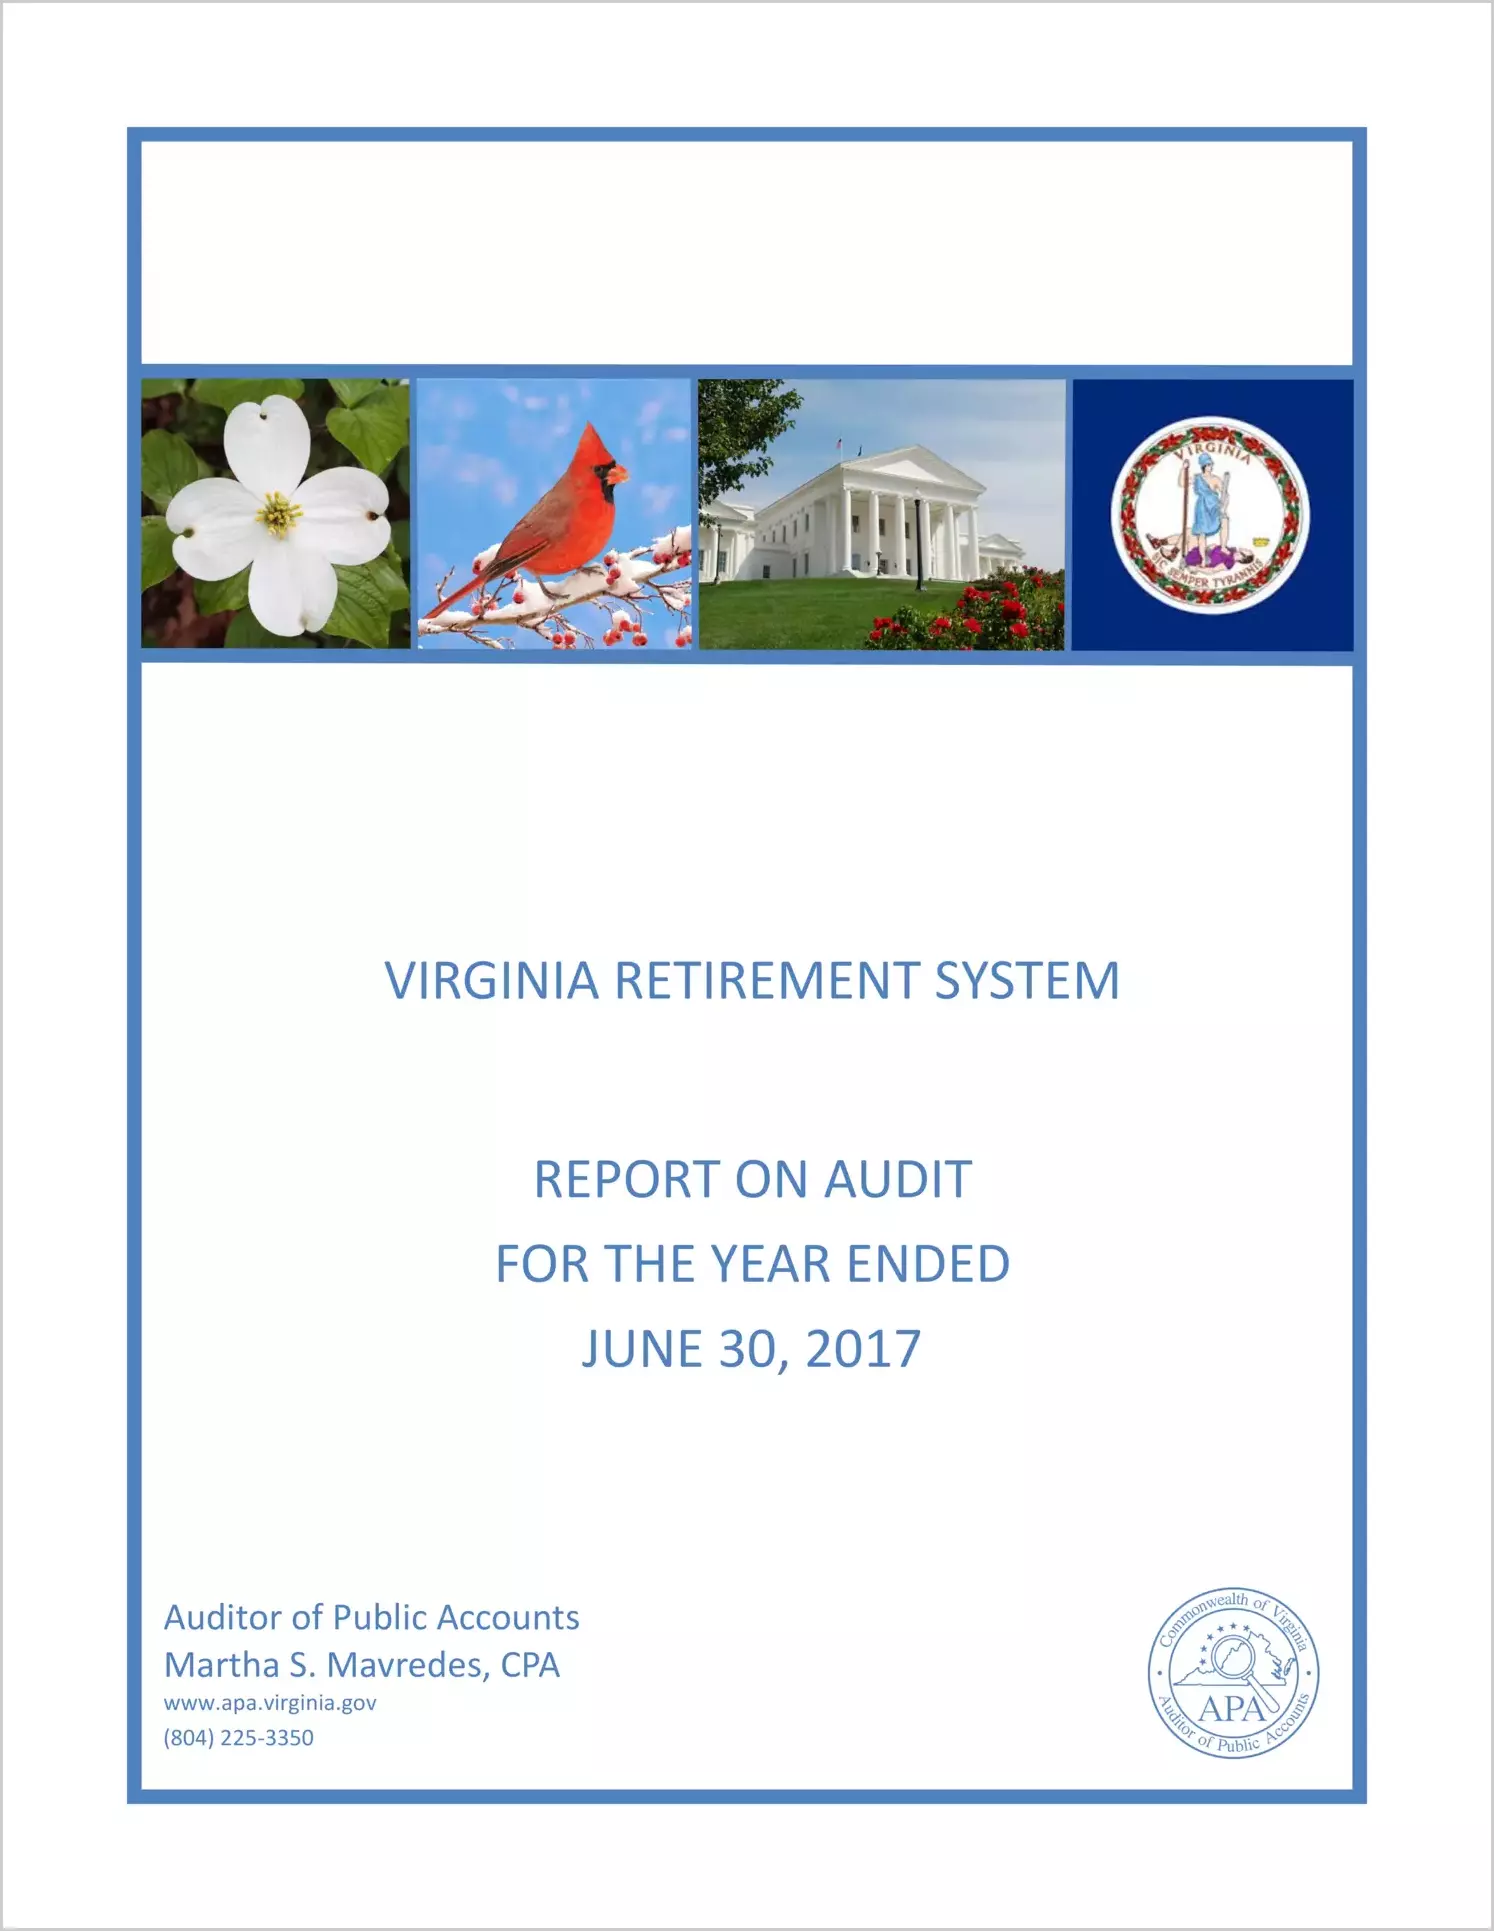 Virginia Retirement System for the year ended June 30, 2017